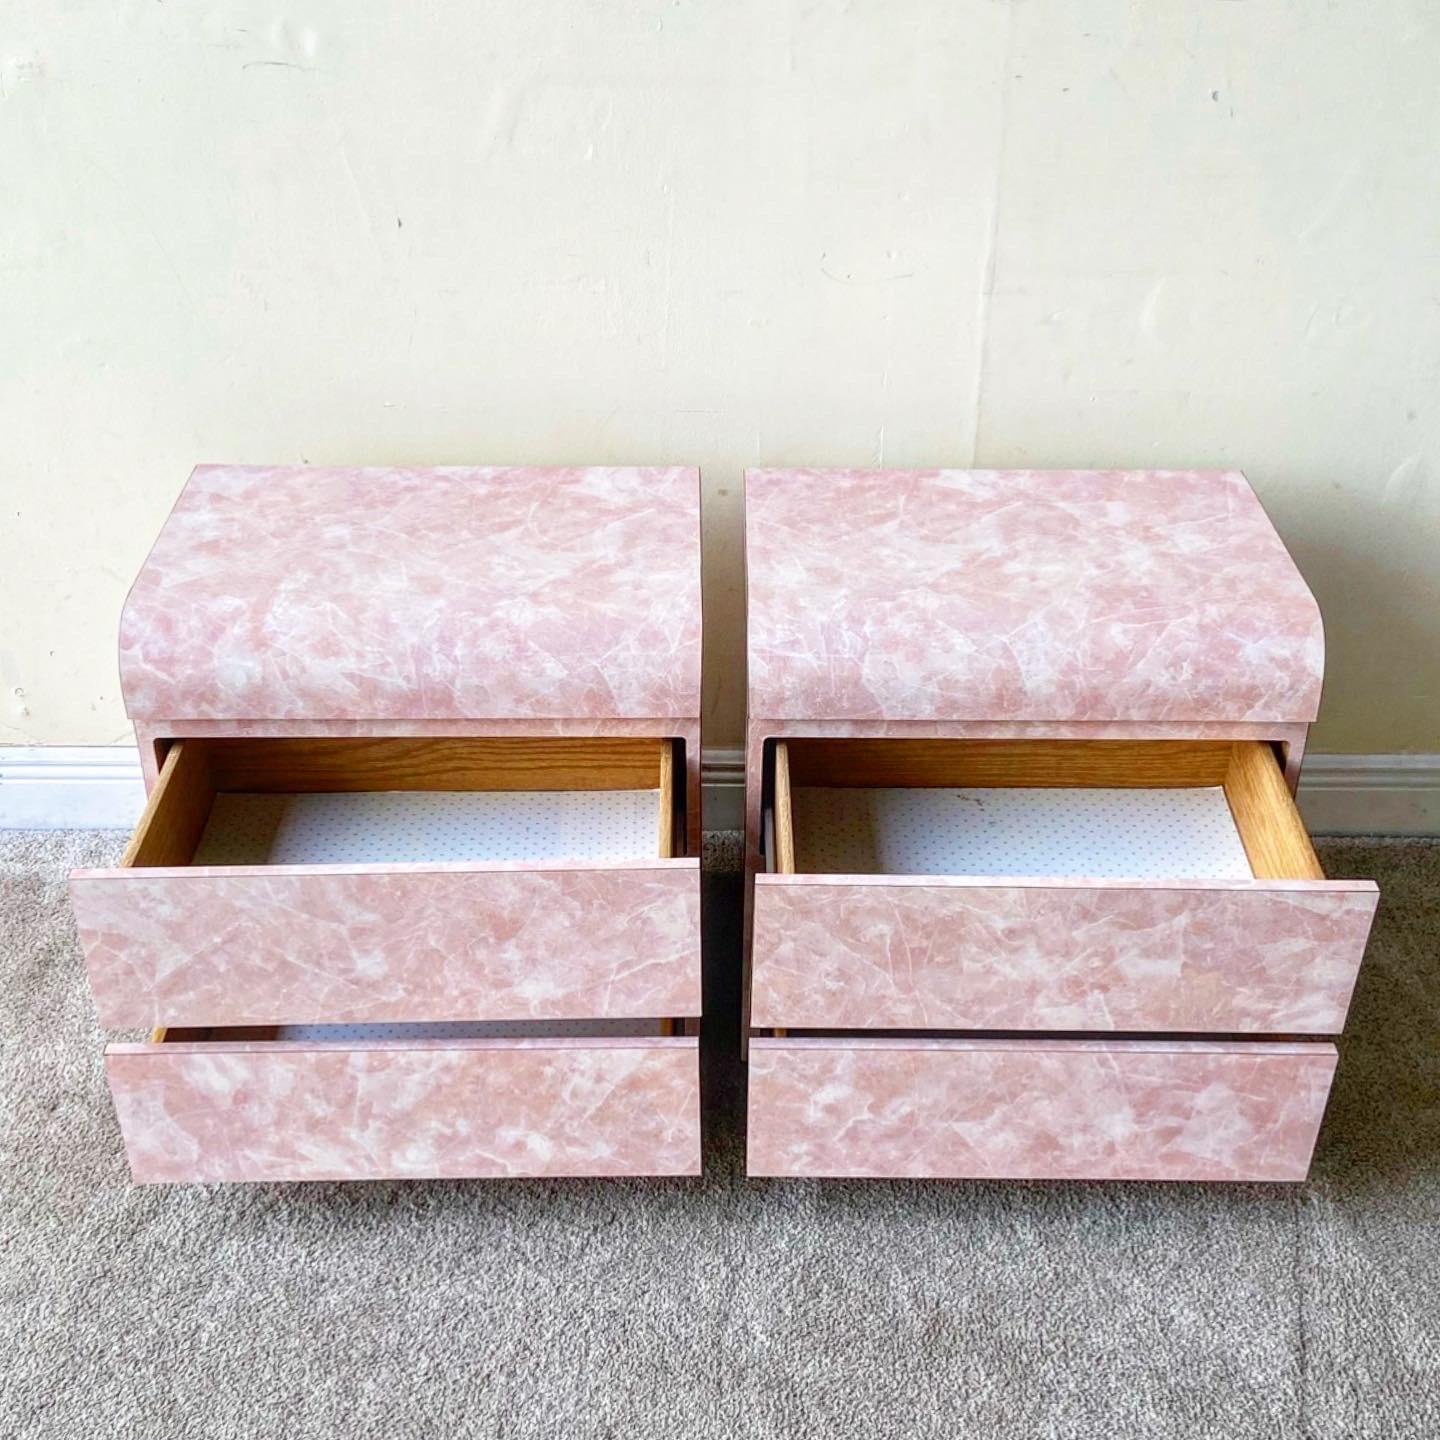 Incredible pair of postmodern waterfall Nighstands with two spacious drawers each. Features a pink and white faux marble gloss laminate.
 